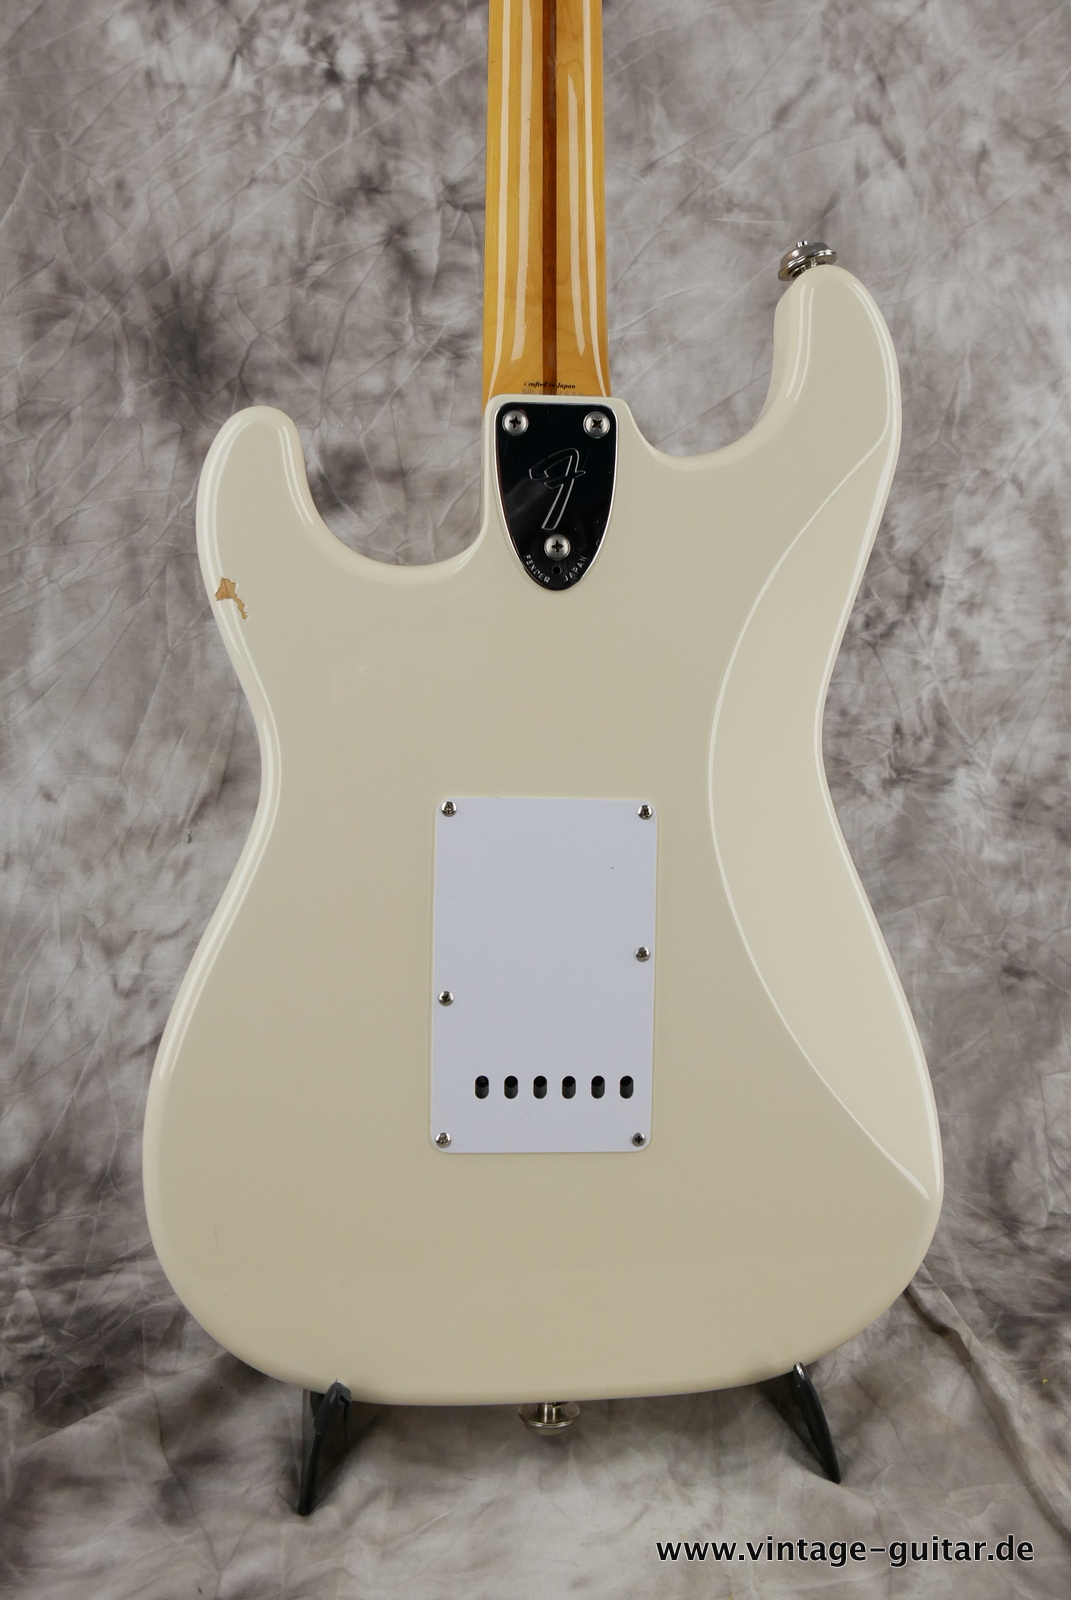 Fender_Strat_Stratocaster_Ritchie_Blackmore_ST-72RB_madeinjapan_1997_olympic_white_singed_scalloped_fretboard-004.JPG